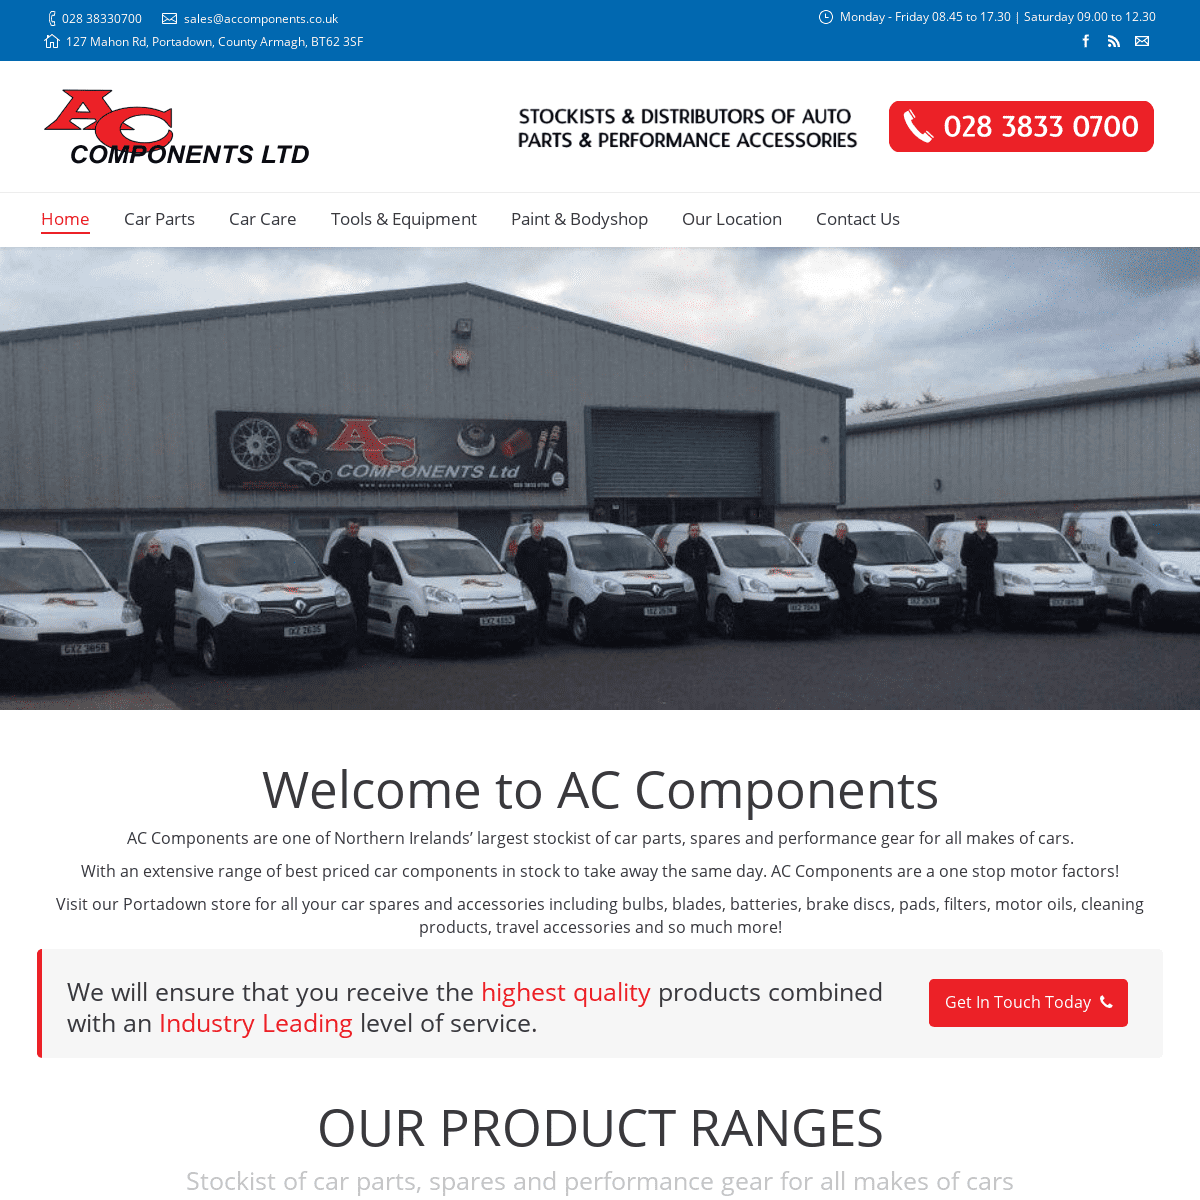 A complete backup of accomponents.co.uk